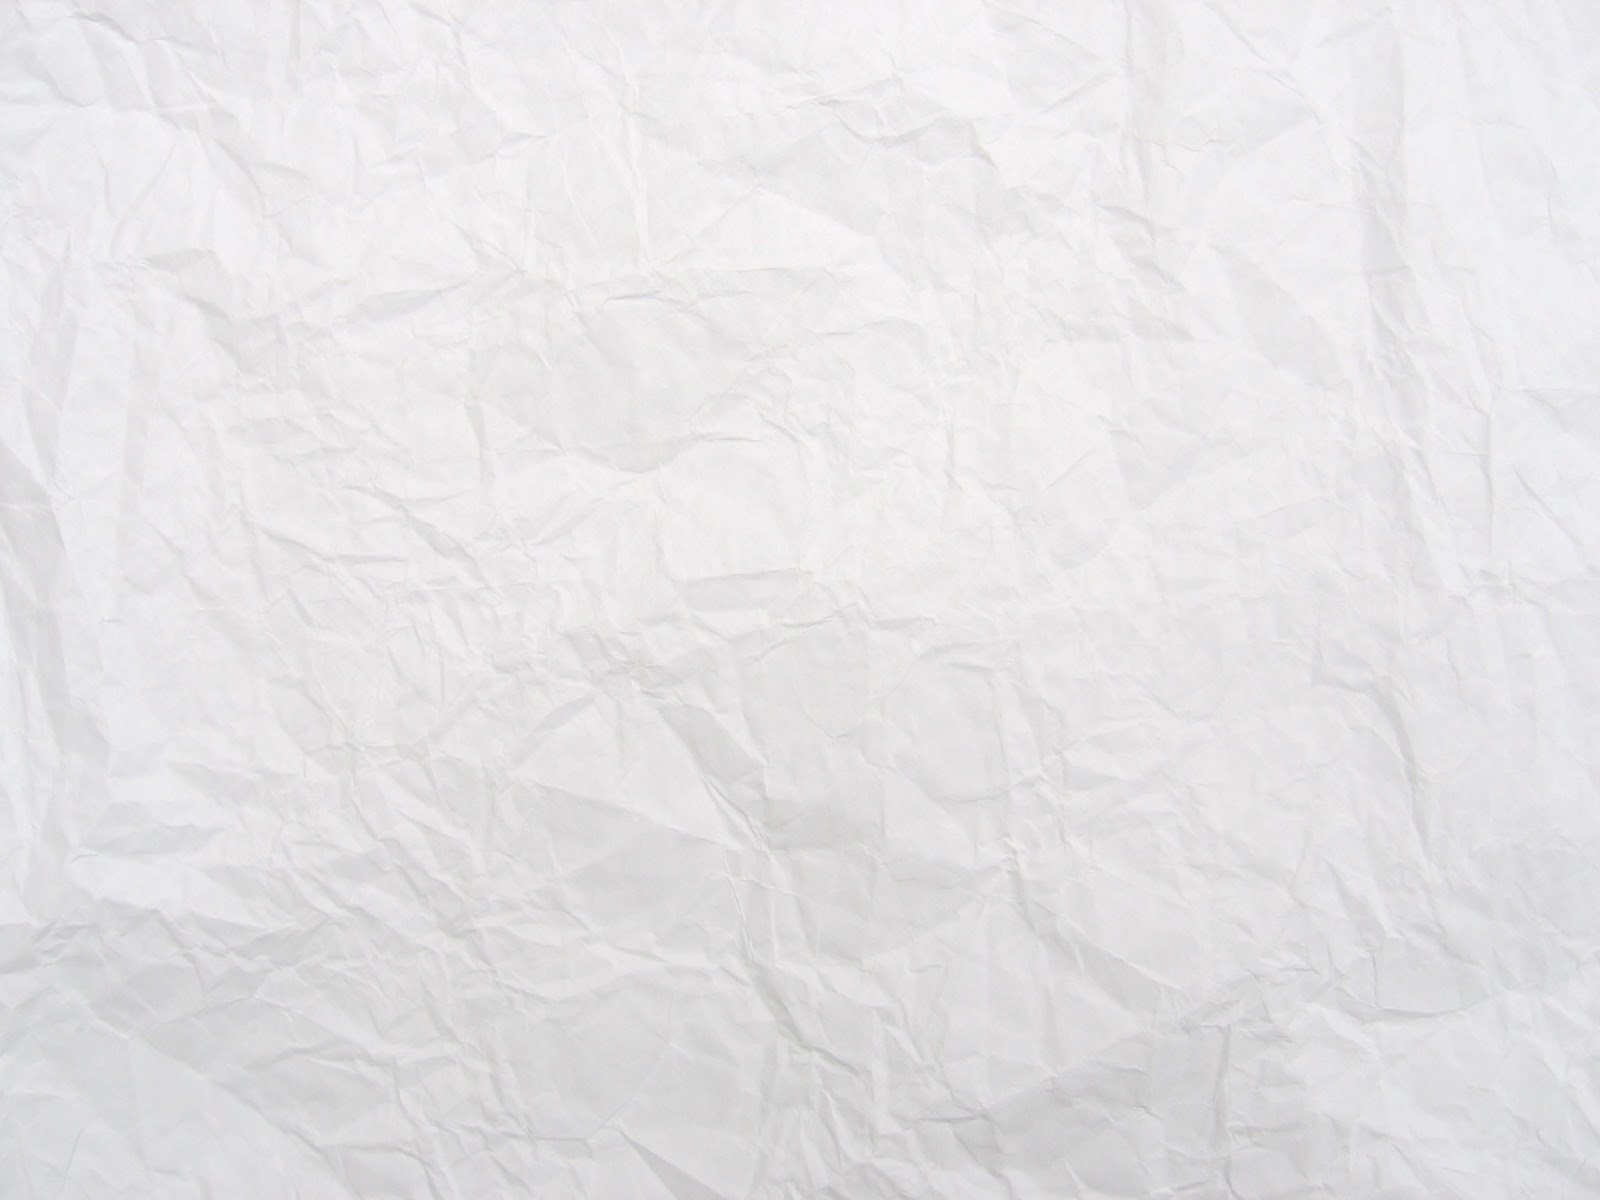 15 Awesome Old Paper Backgrounds